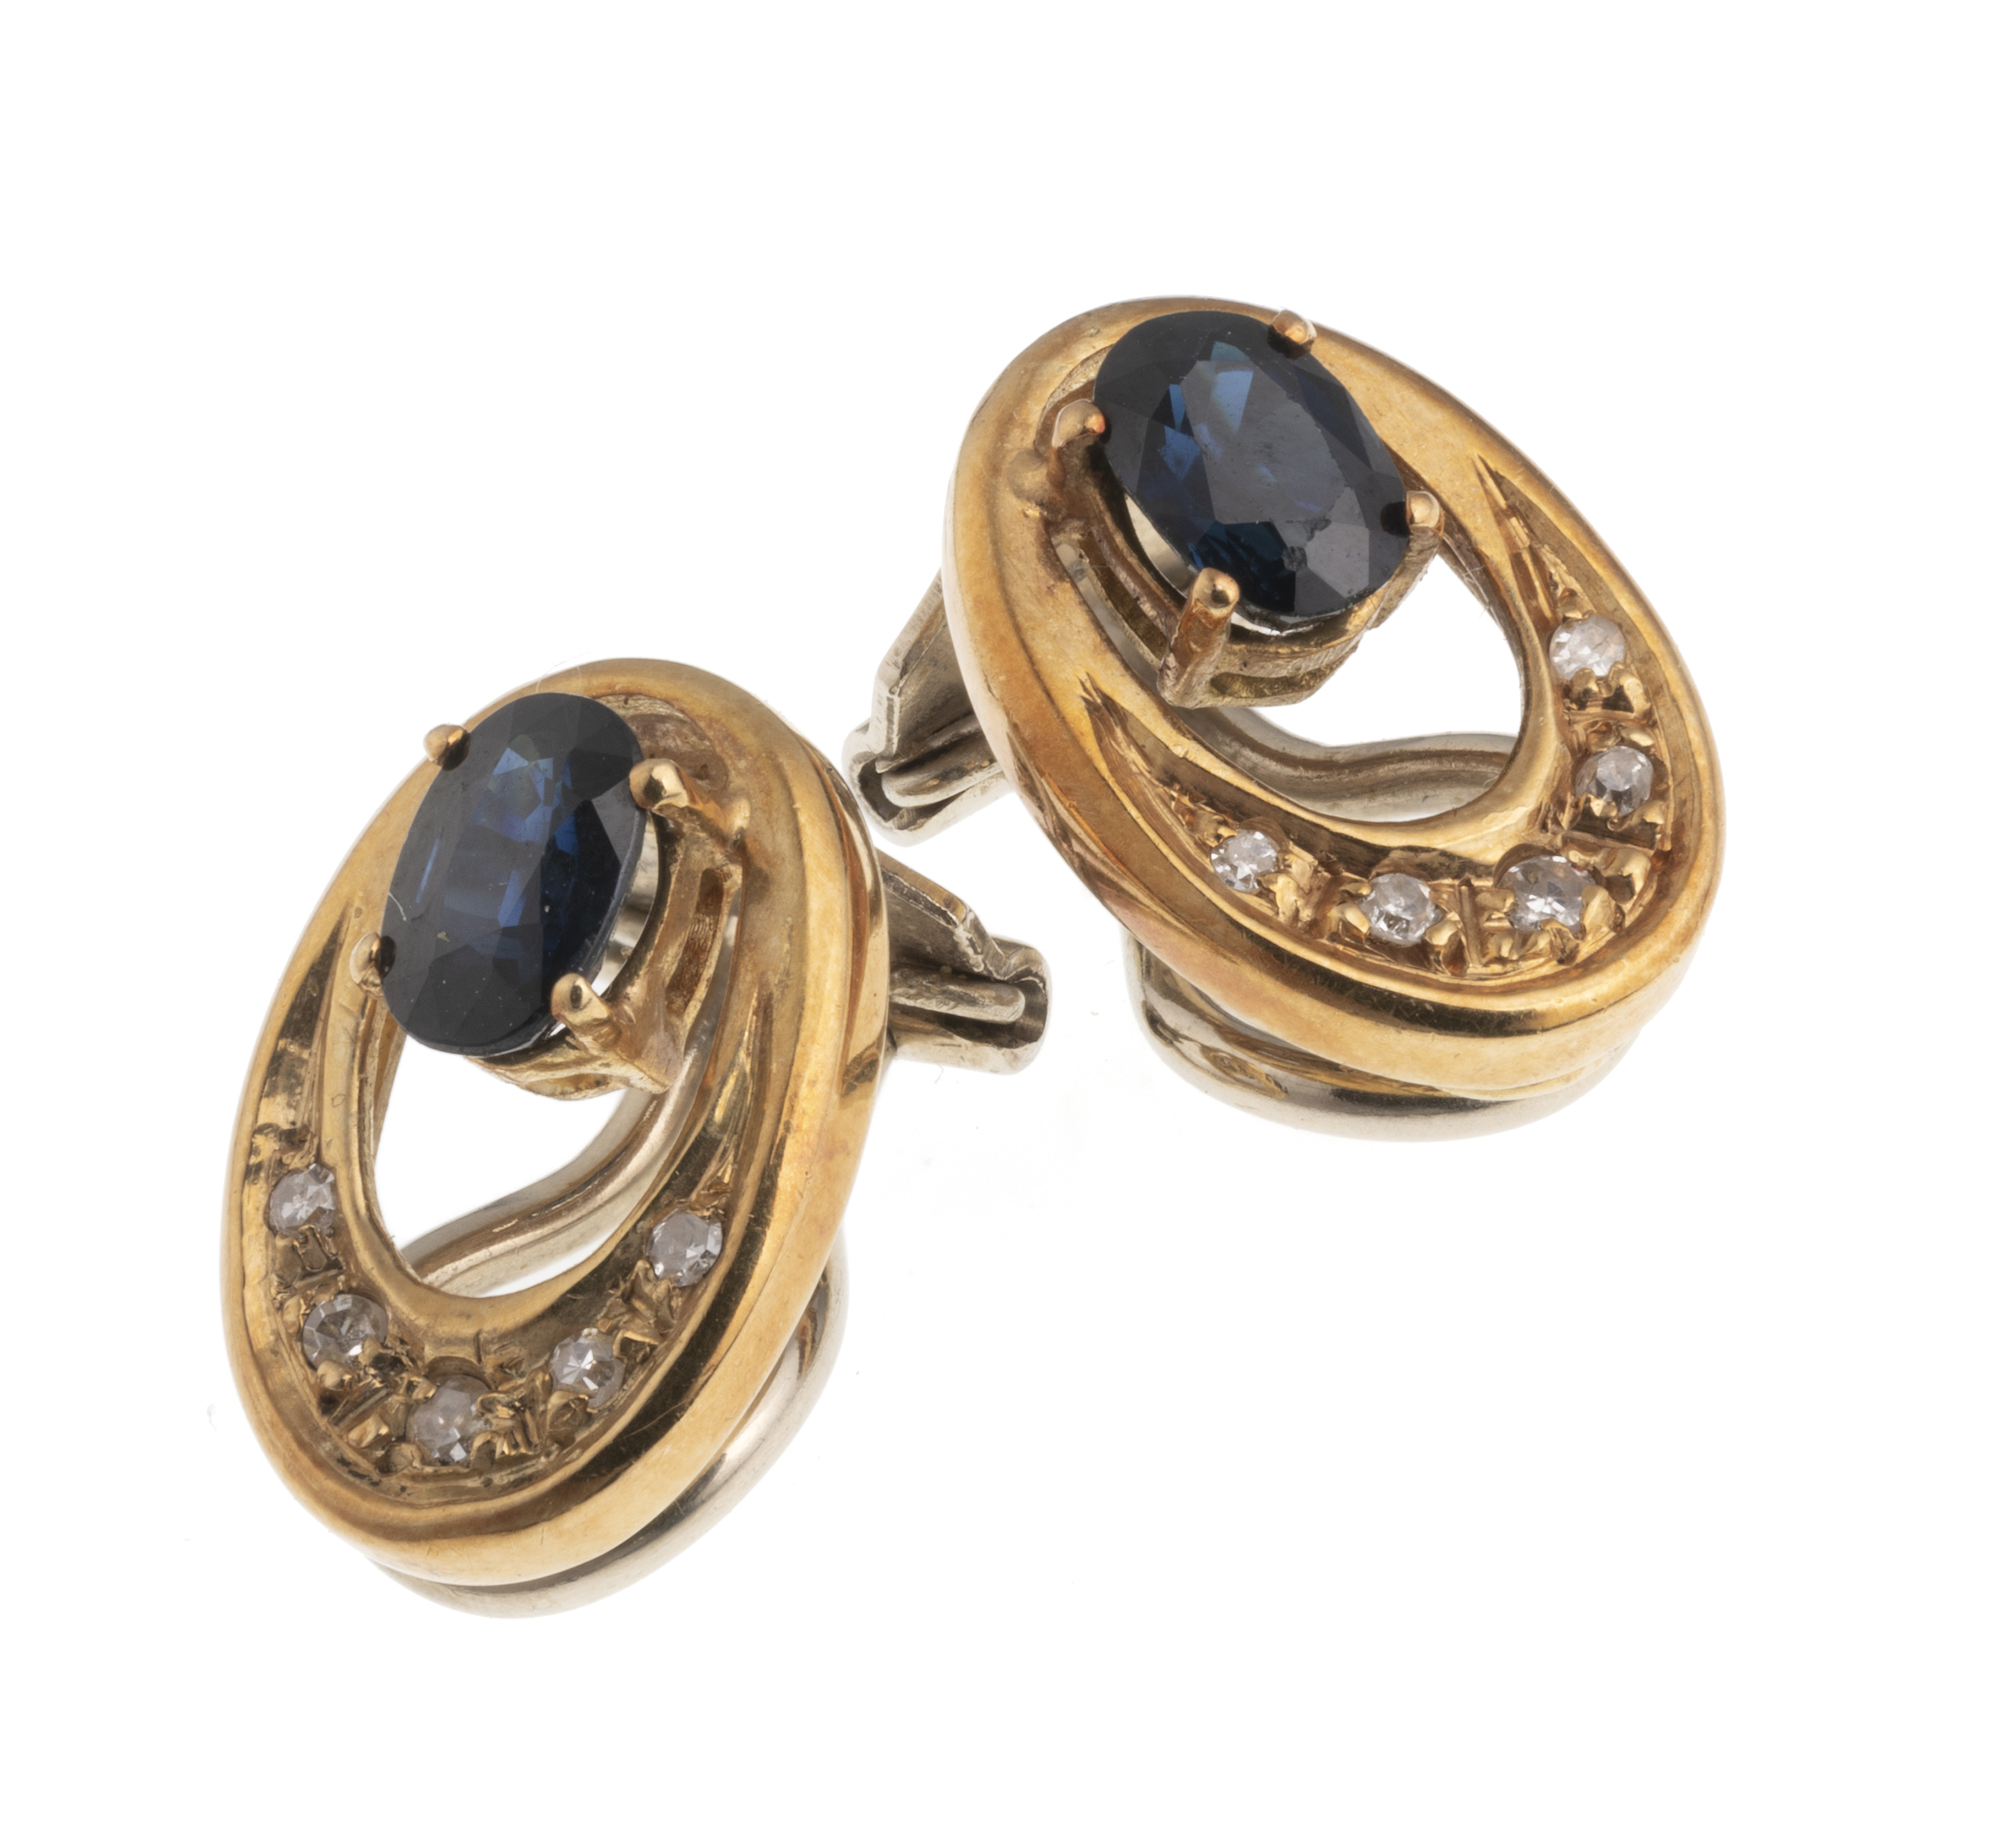 GOLD EARRINGS WITH DIAMONDS AND SMALL SAPPHIRES